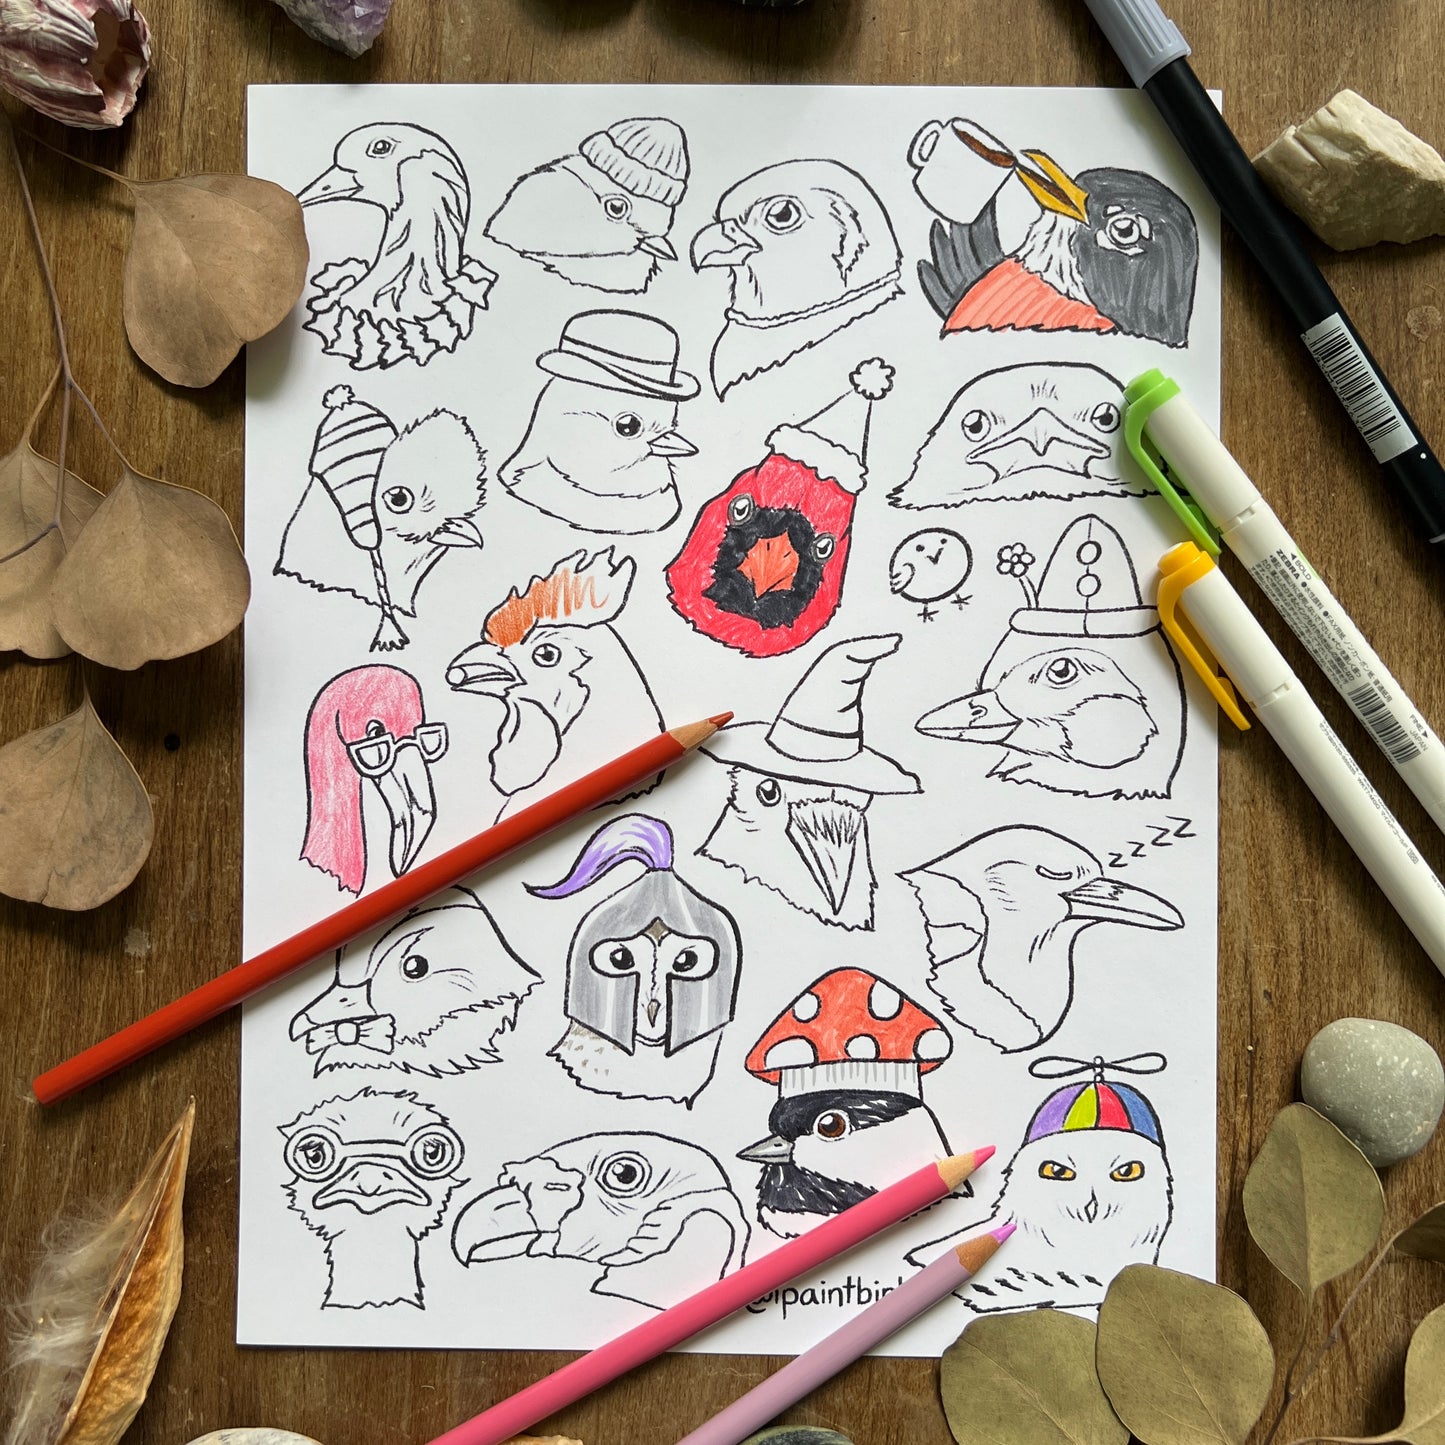 Birb Portraits: Part Two | Coloring Page